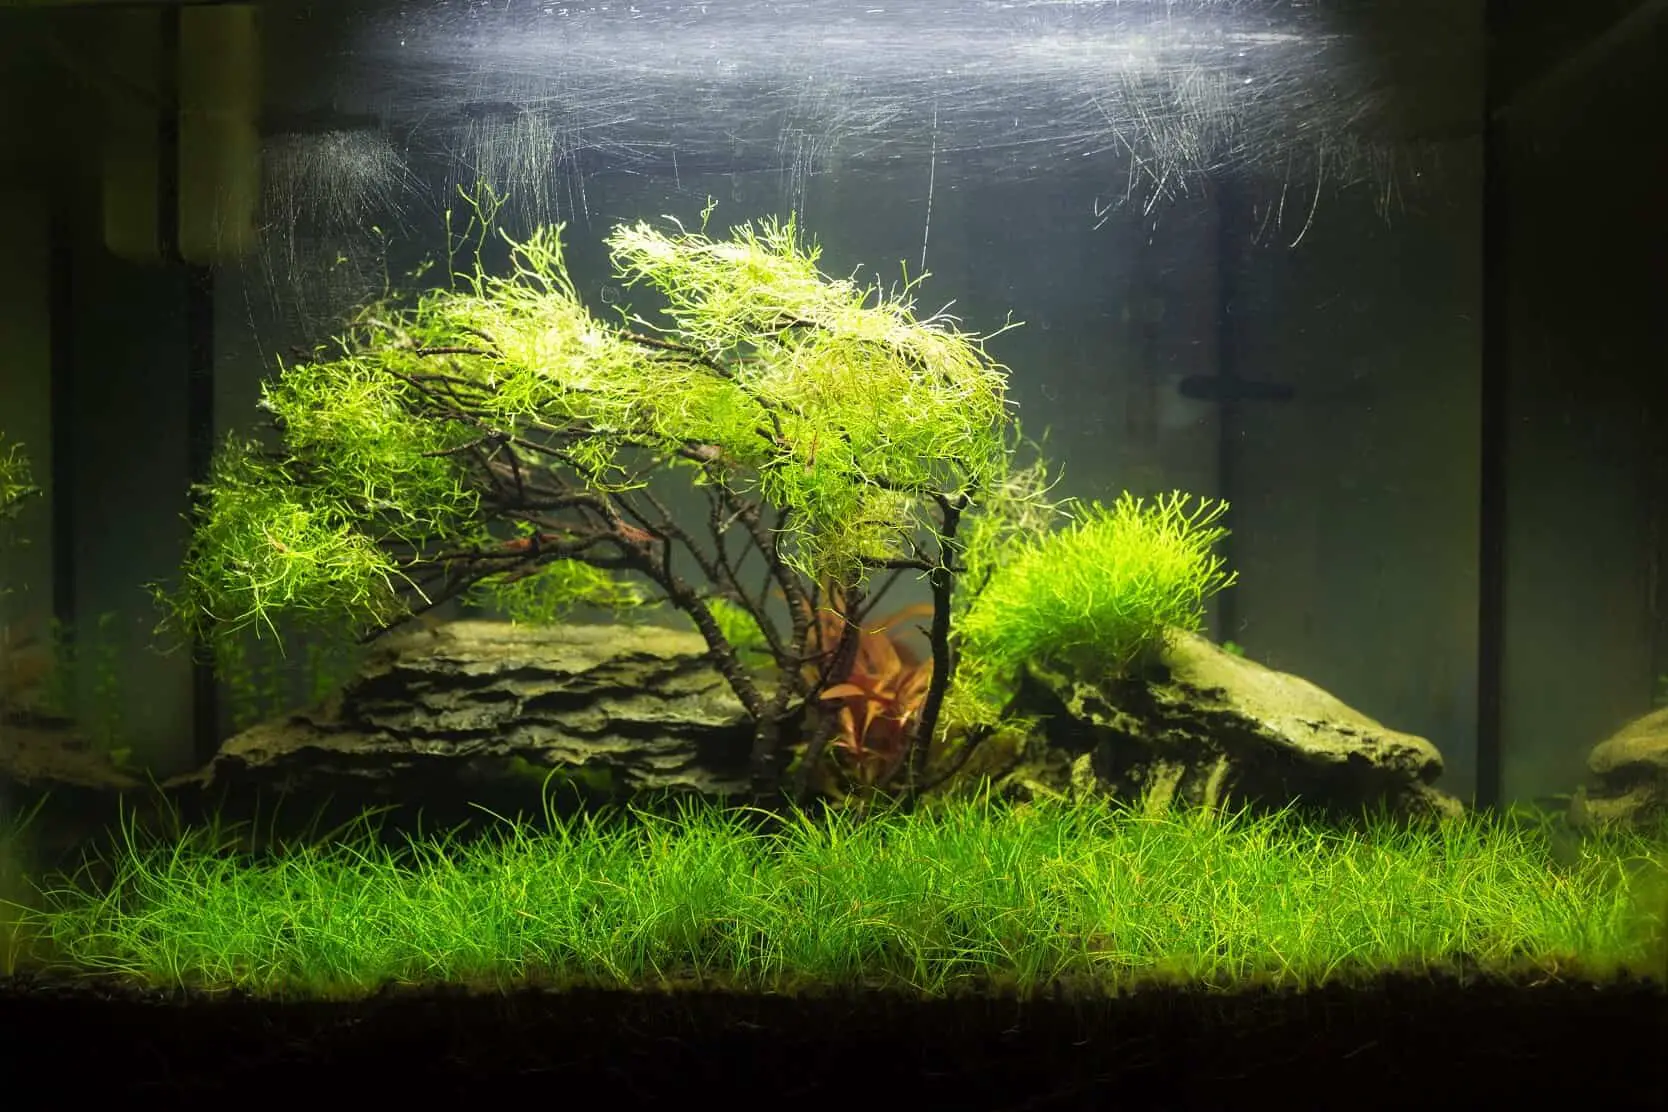 How To Plant Grass In An Aquarium